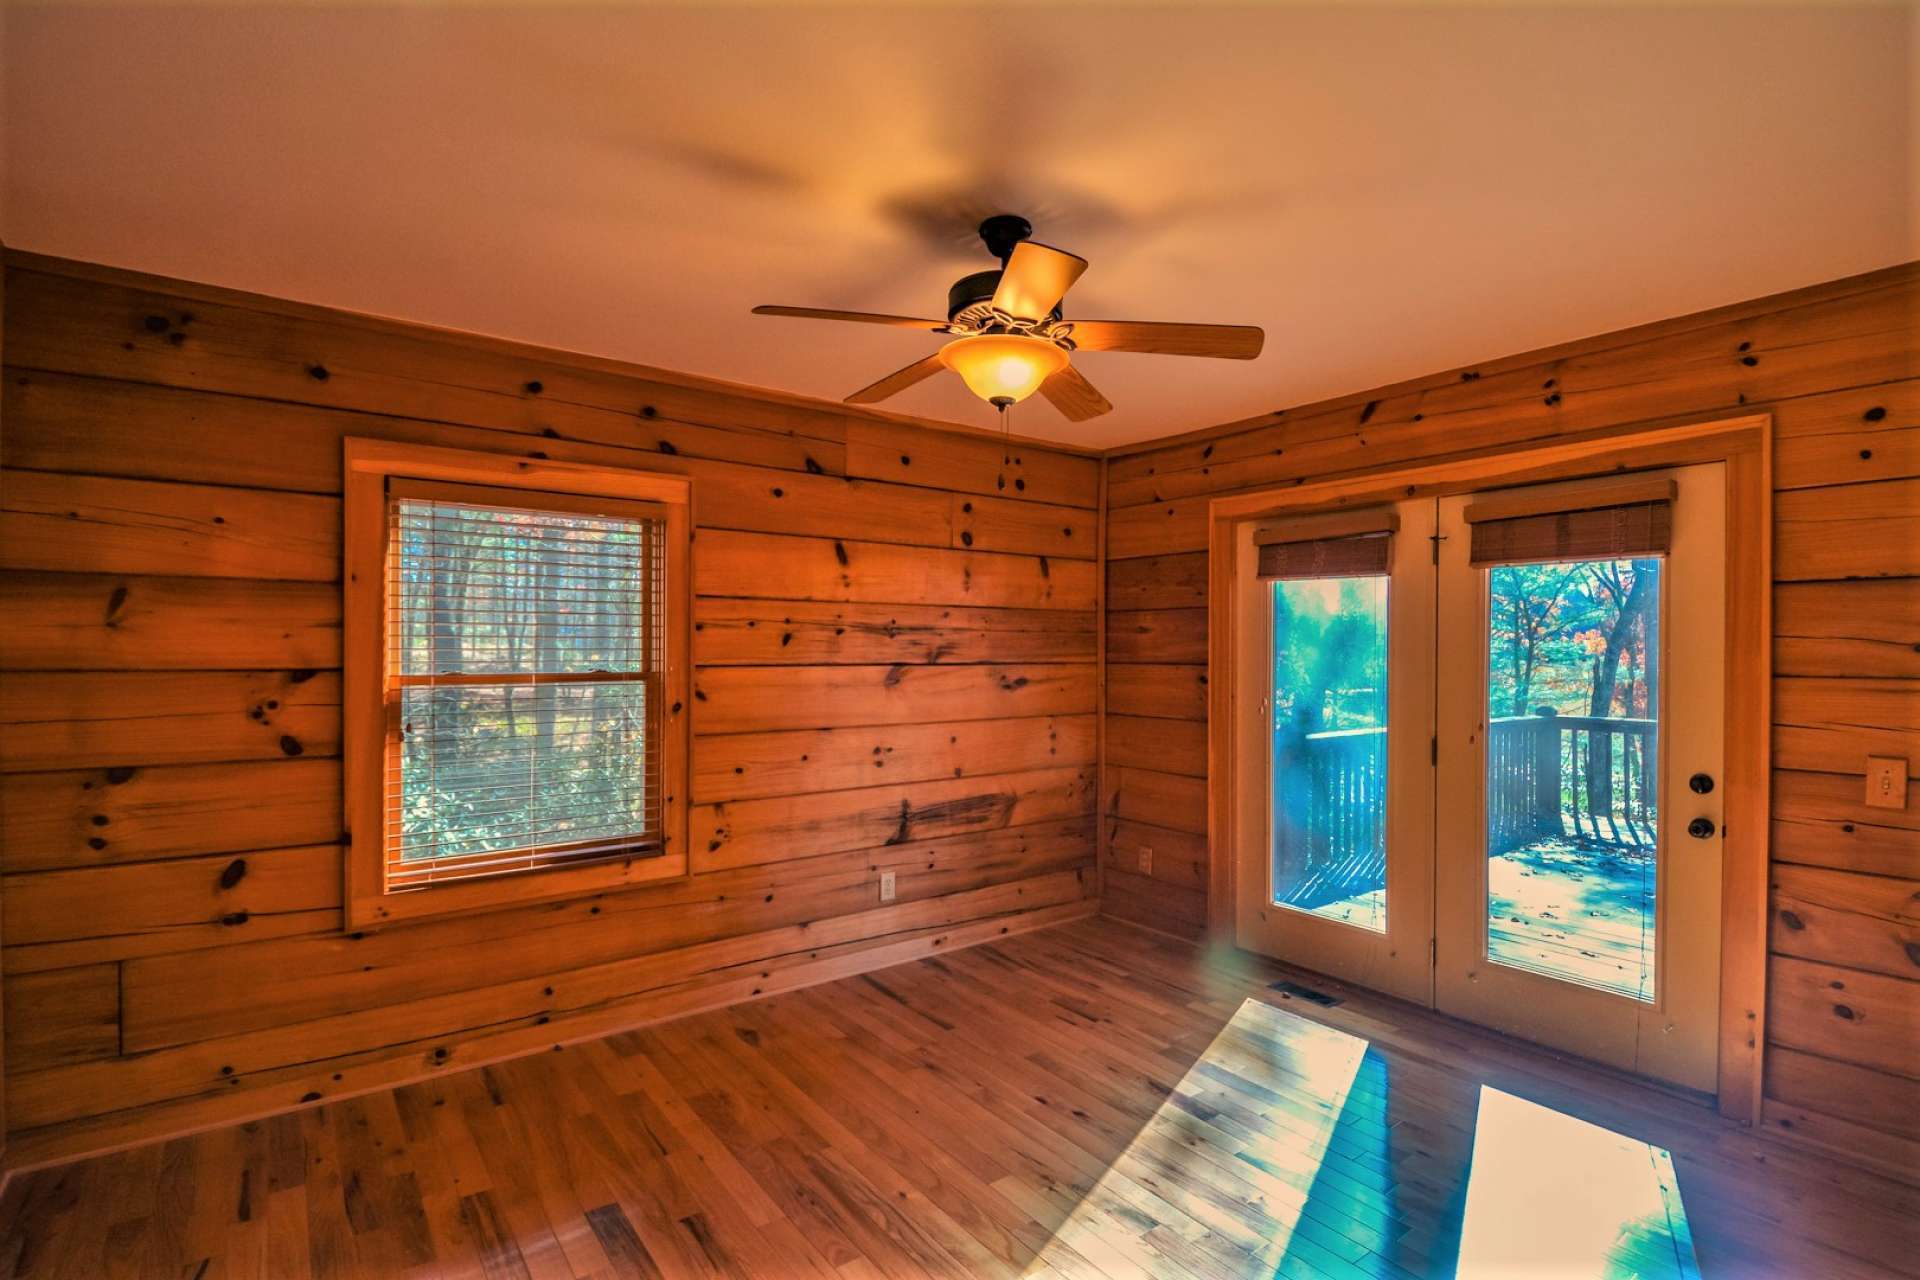 Two guest bedrooms share a full bath and complete the main level. This guest bedroom also offers private access to the deck.